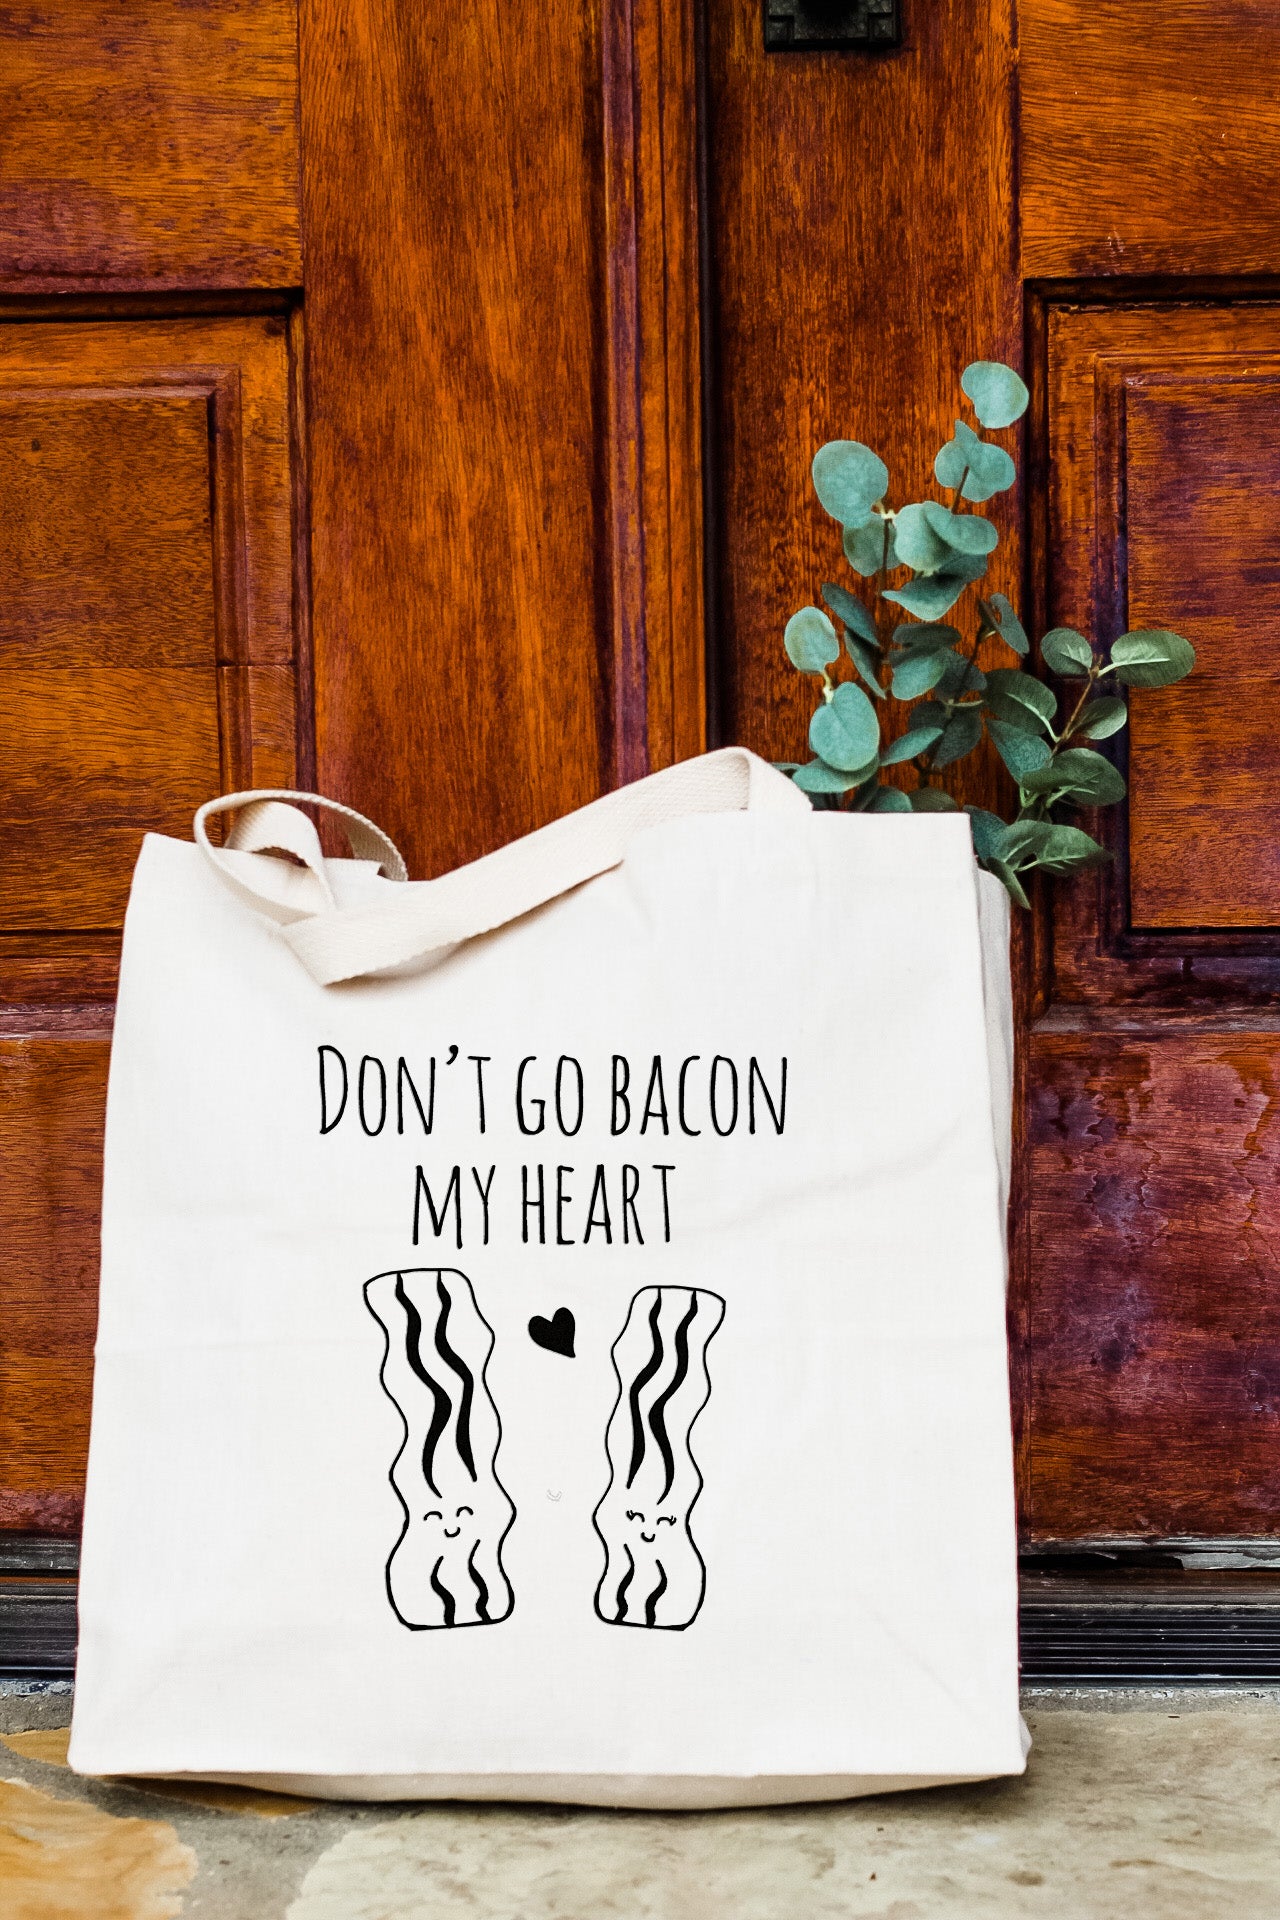 Don't Go Bacon My Heart - Tote Bag - MoonlightMakers